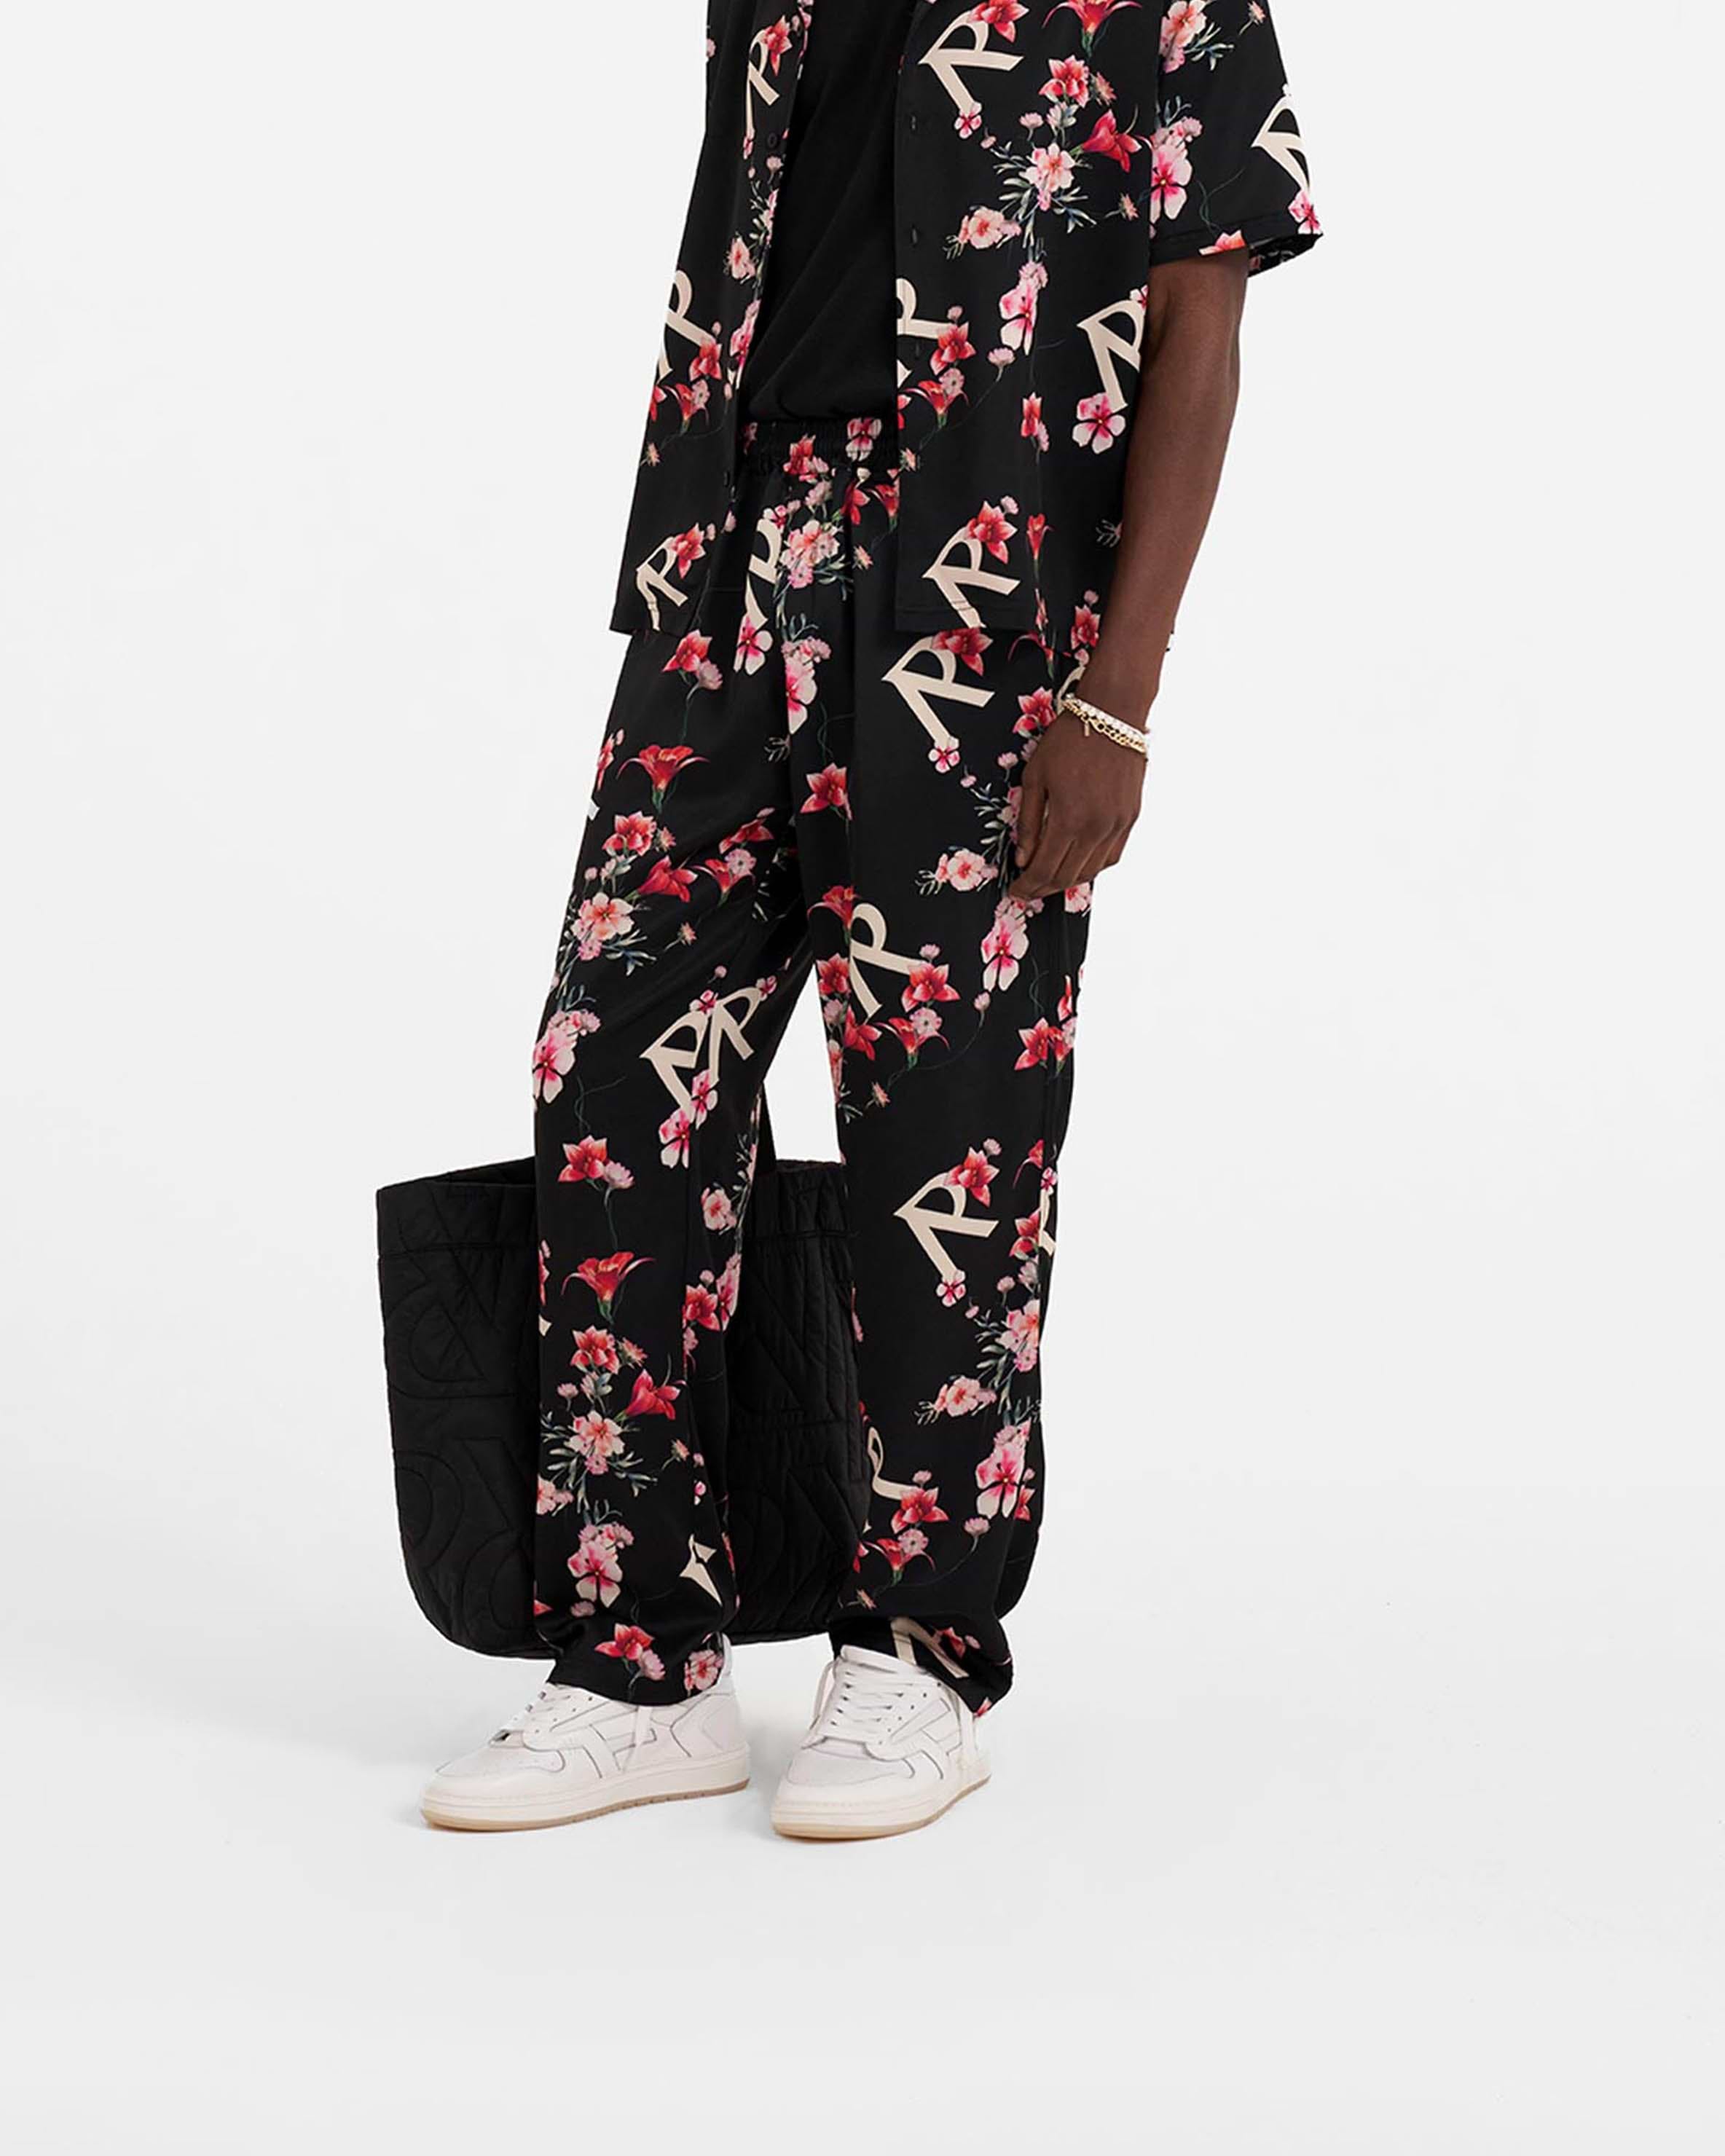 Black Floral Flare Pants | Earthbound Trading Co.